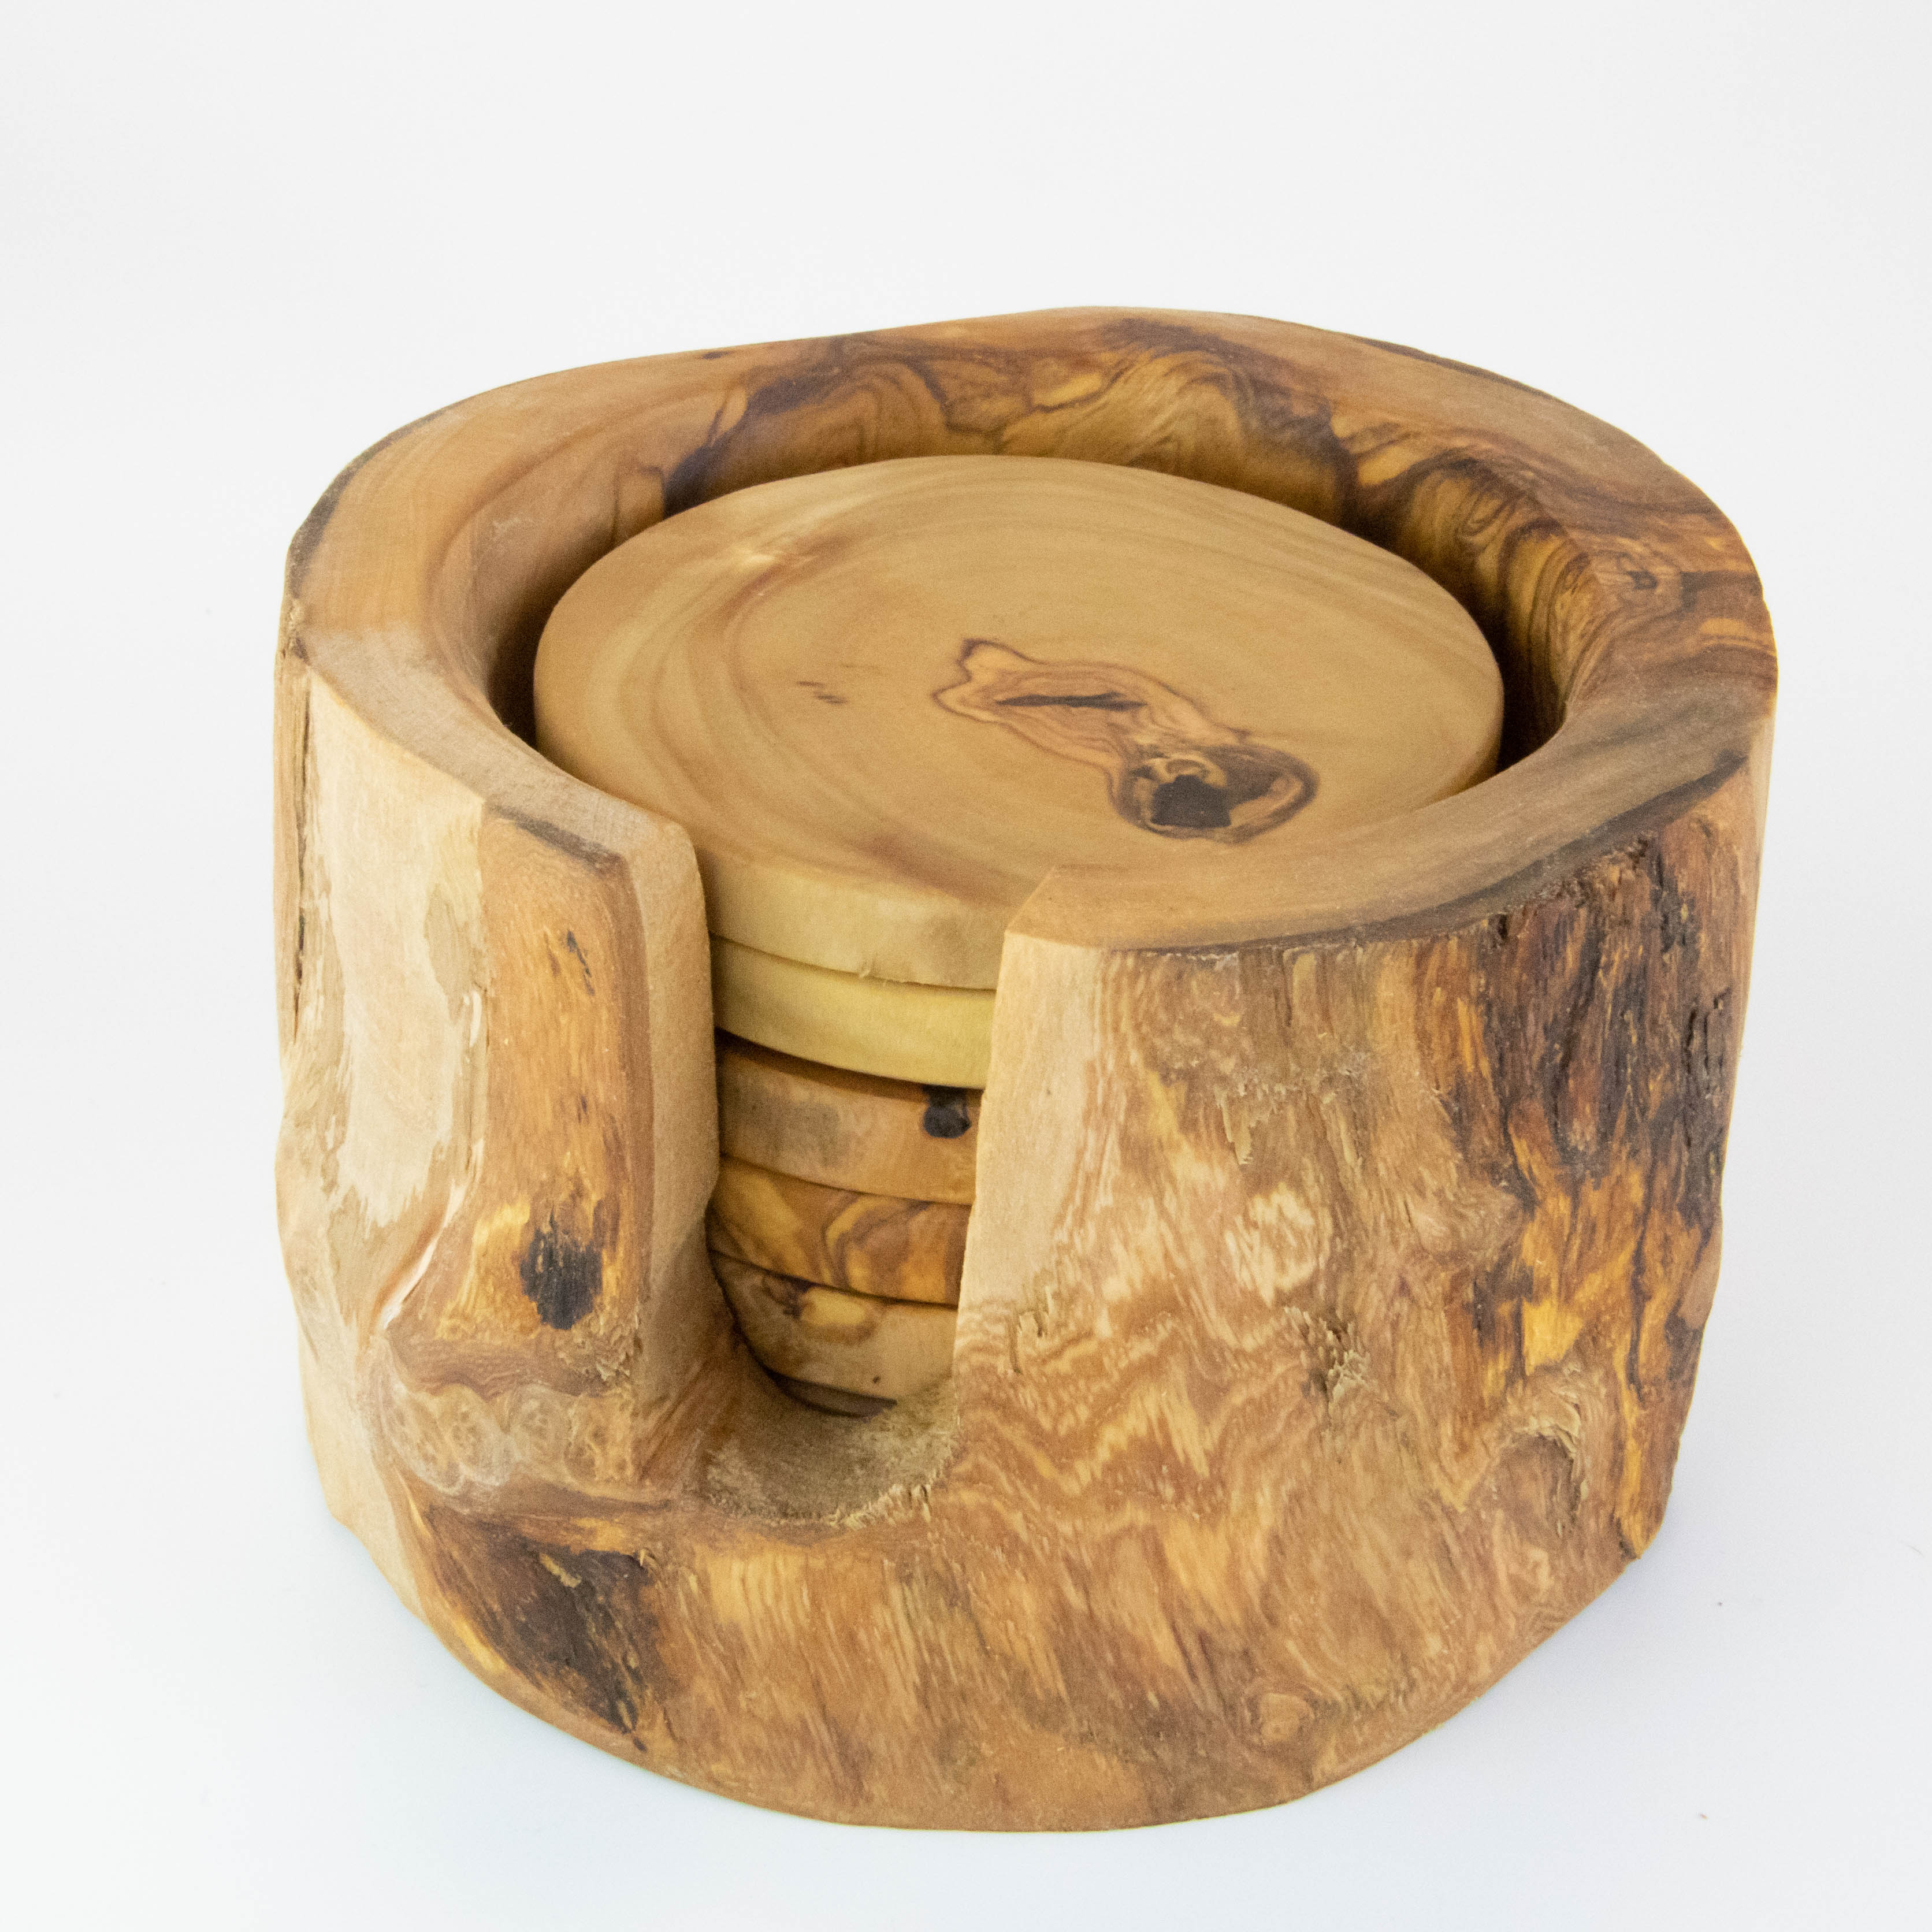 Set of 6 olive wood coasters with stand.